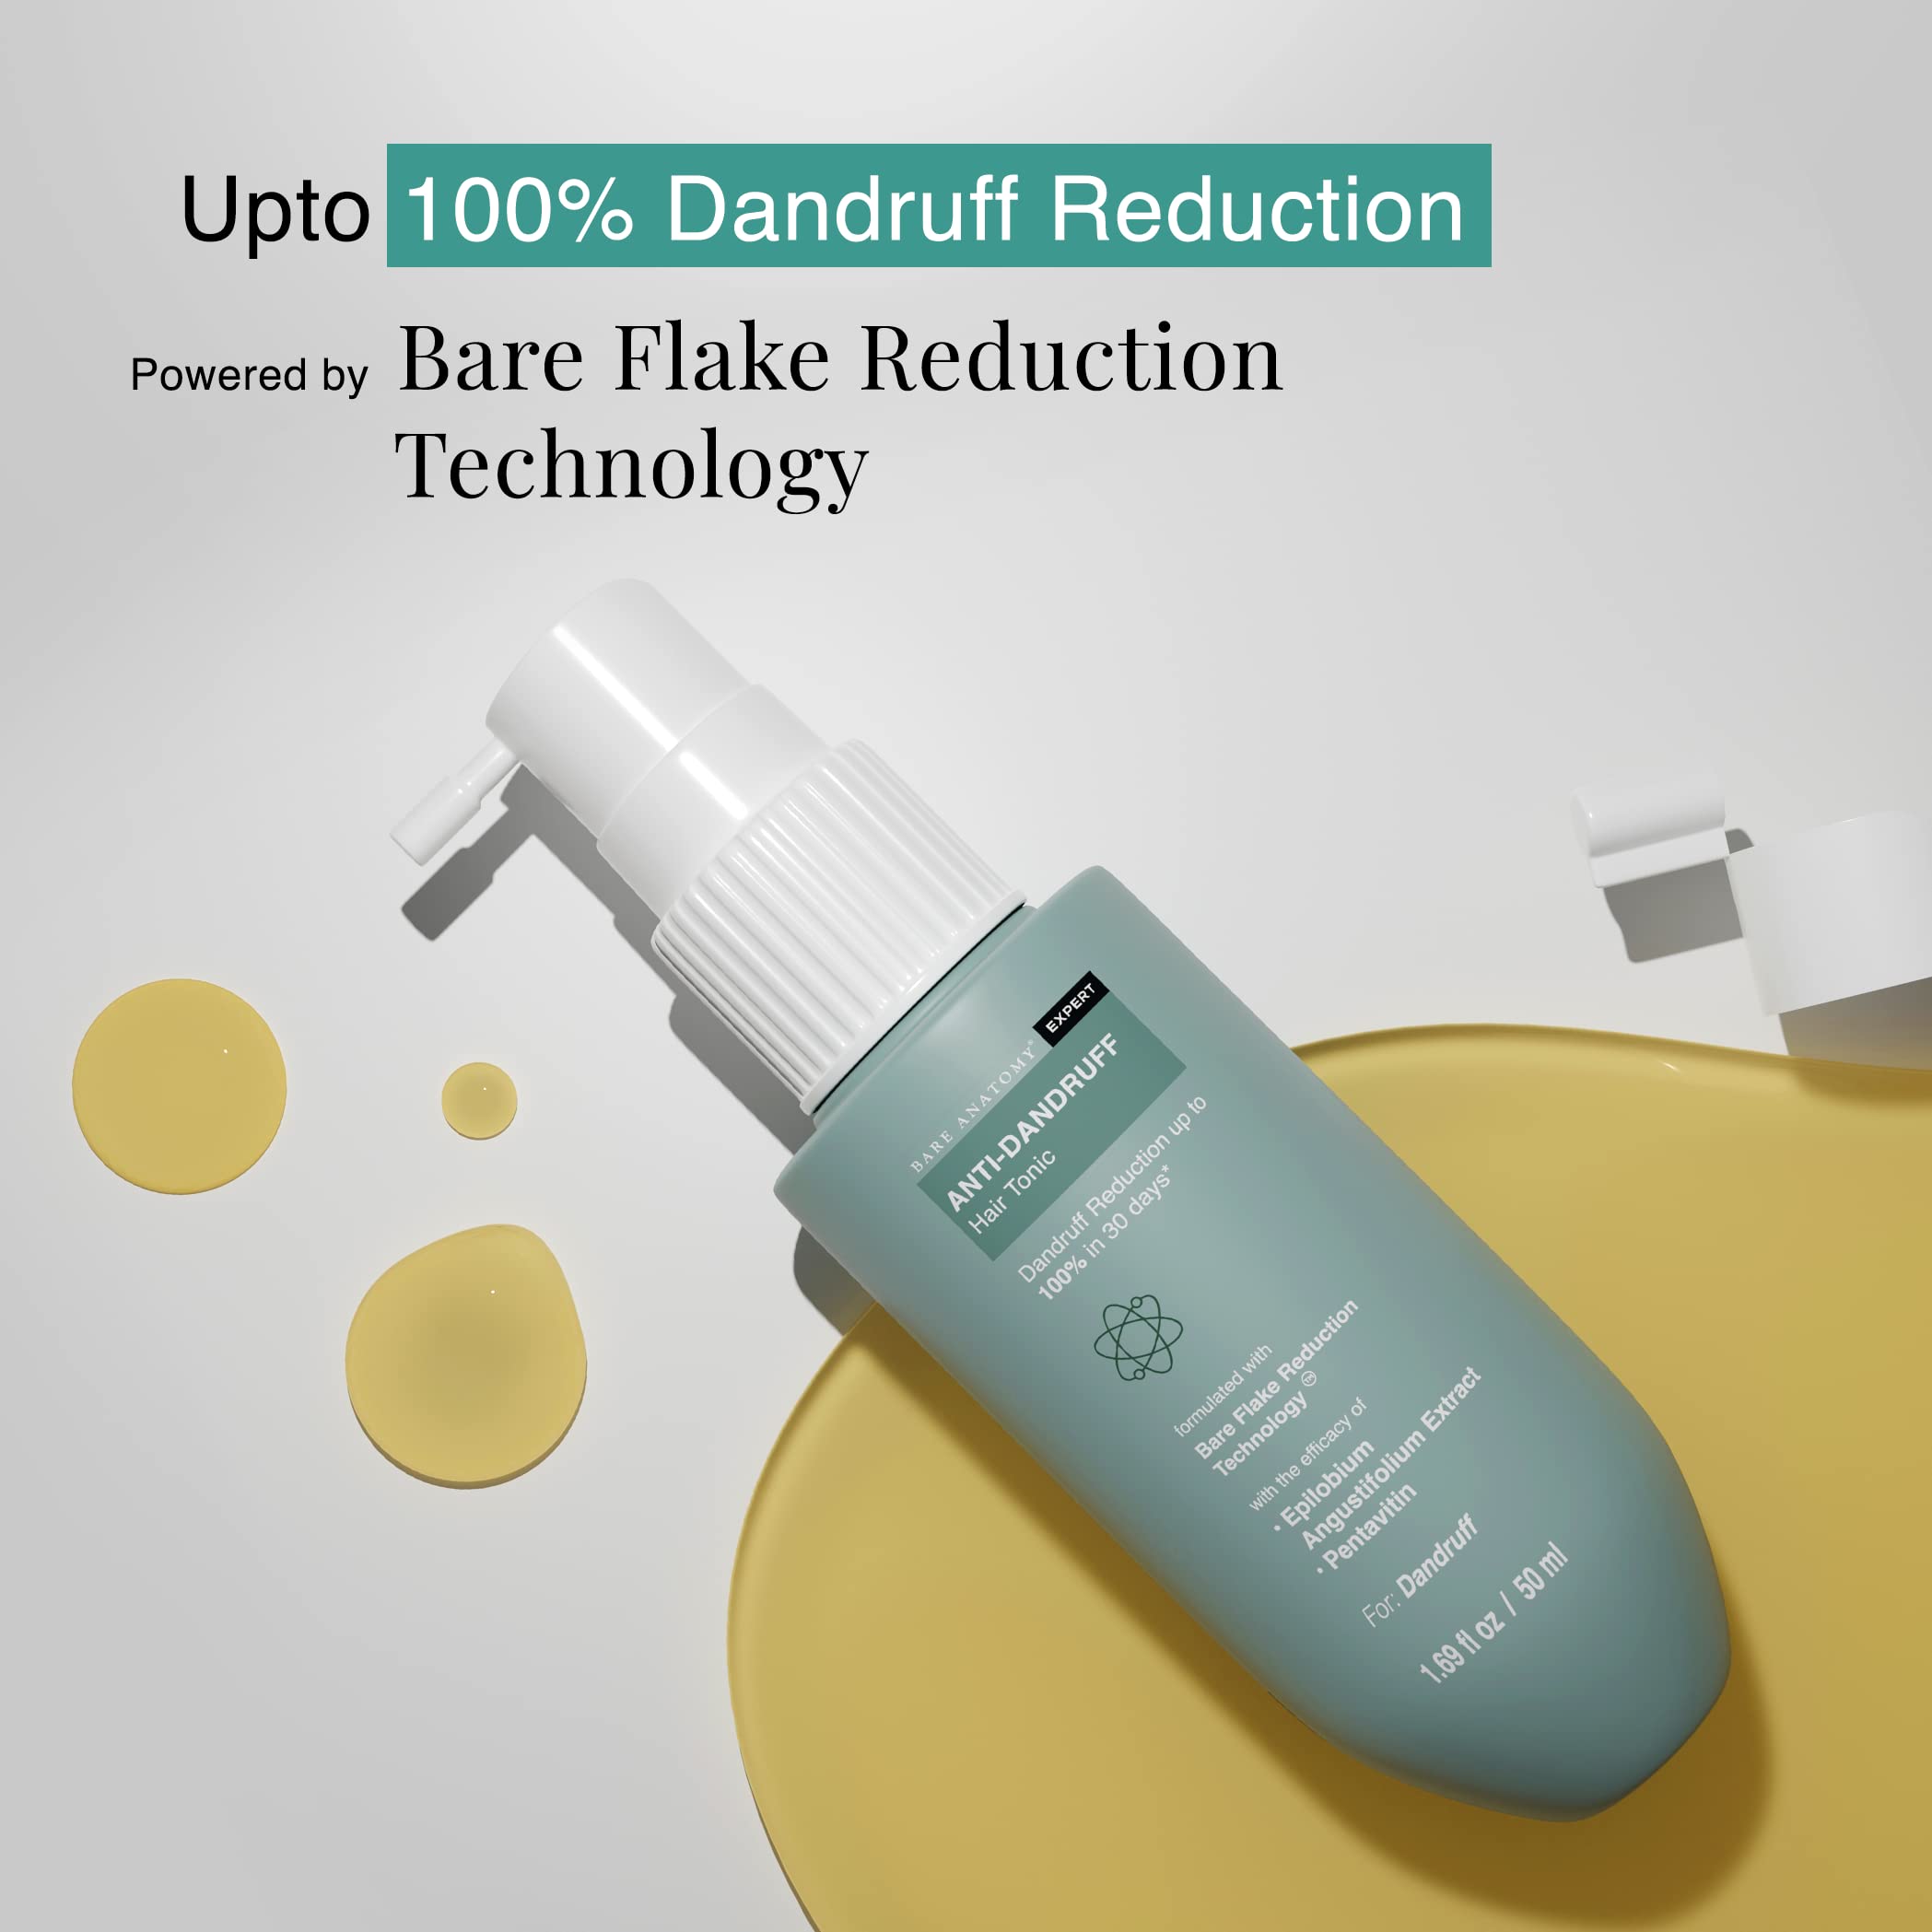 Bare Anatomy Anti-Dandruff Tonic | Dandruff Reduction Up to 100% in 30 Days | Contains Aloe Vera Extract and Tea Tree Oil | Suitable For All Hair Types including Oily Scalp | 50 ml